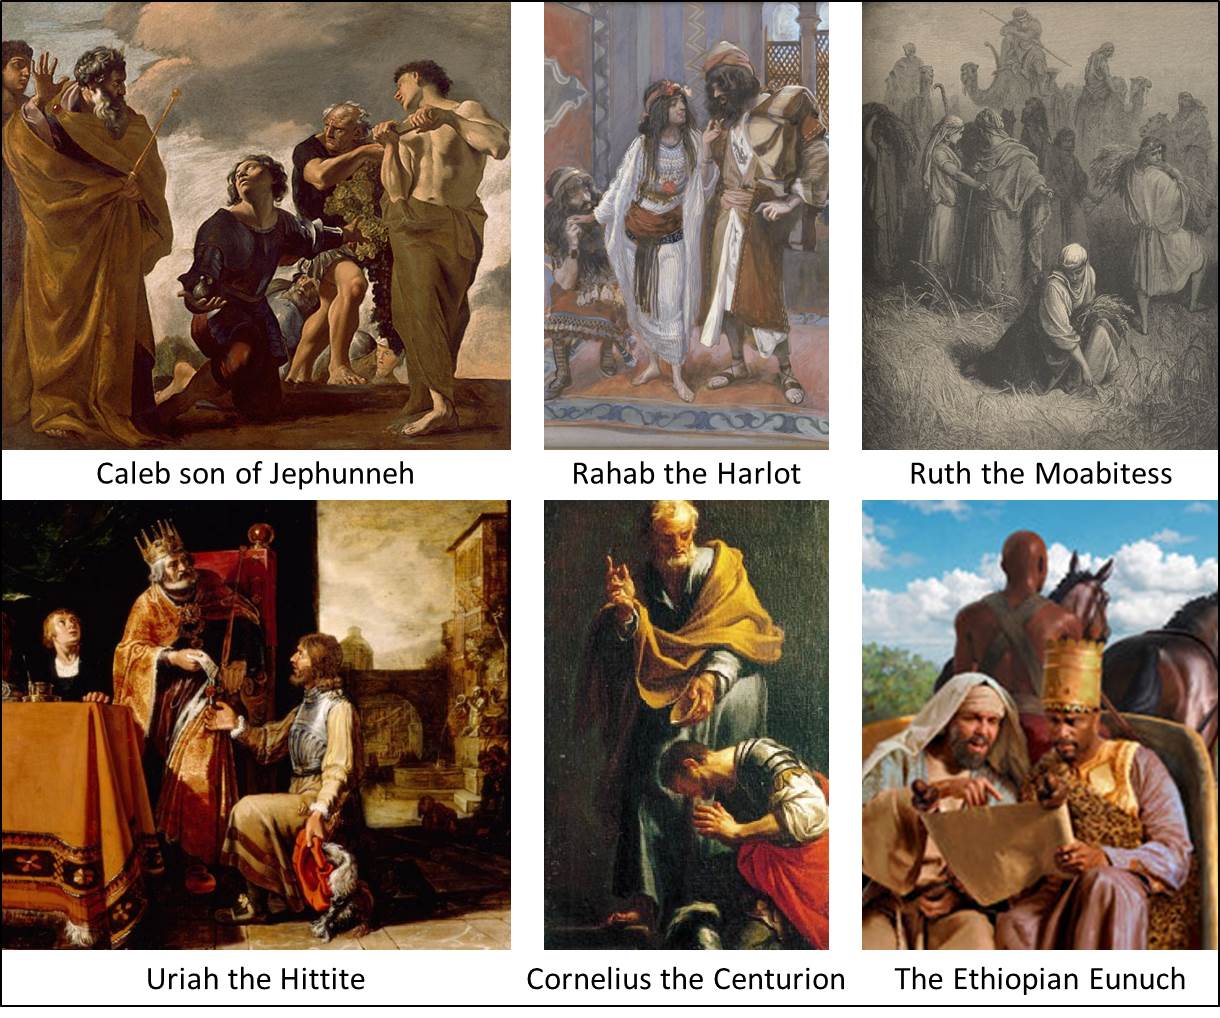 Foreigners who were grafted in to Israel.  Clockwise from top left:  Caleb son of Jephunneh (Moses and the Messengers from Canaan, Giovanni Lanfranco); Rahab the Harlot (The Harlot of Jericho and the Two Spies, James Tissot); Ruth the Moabitess (Ruth and Boaz, Gustave Doré); Uriah the Hittite (King David Handing the Letter to Uriah, Pieter Lastman); Cornelius the Centurion (Baptism of Cornelius, Francesco Trevisani); The Ethiopian Eunuch (Baptism of the Ethiopian Eunuch, www.tillhecomes.org). 